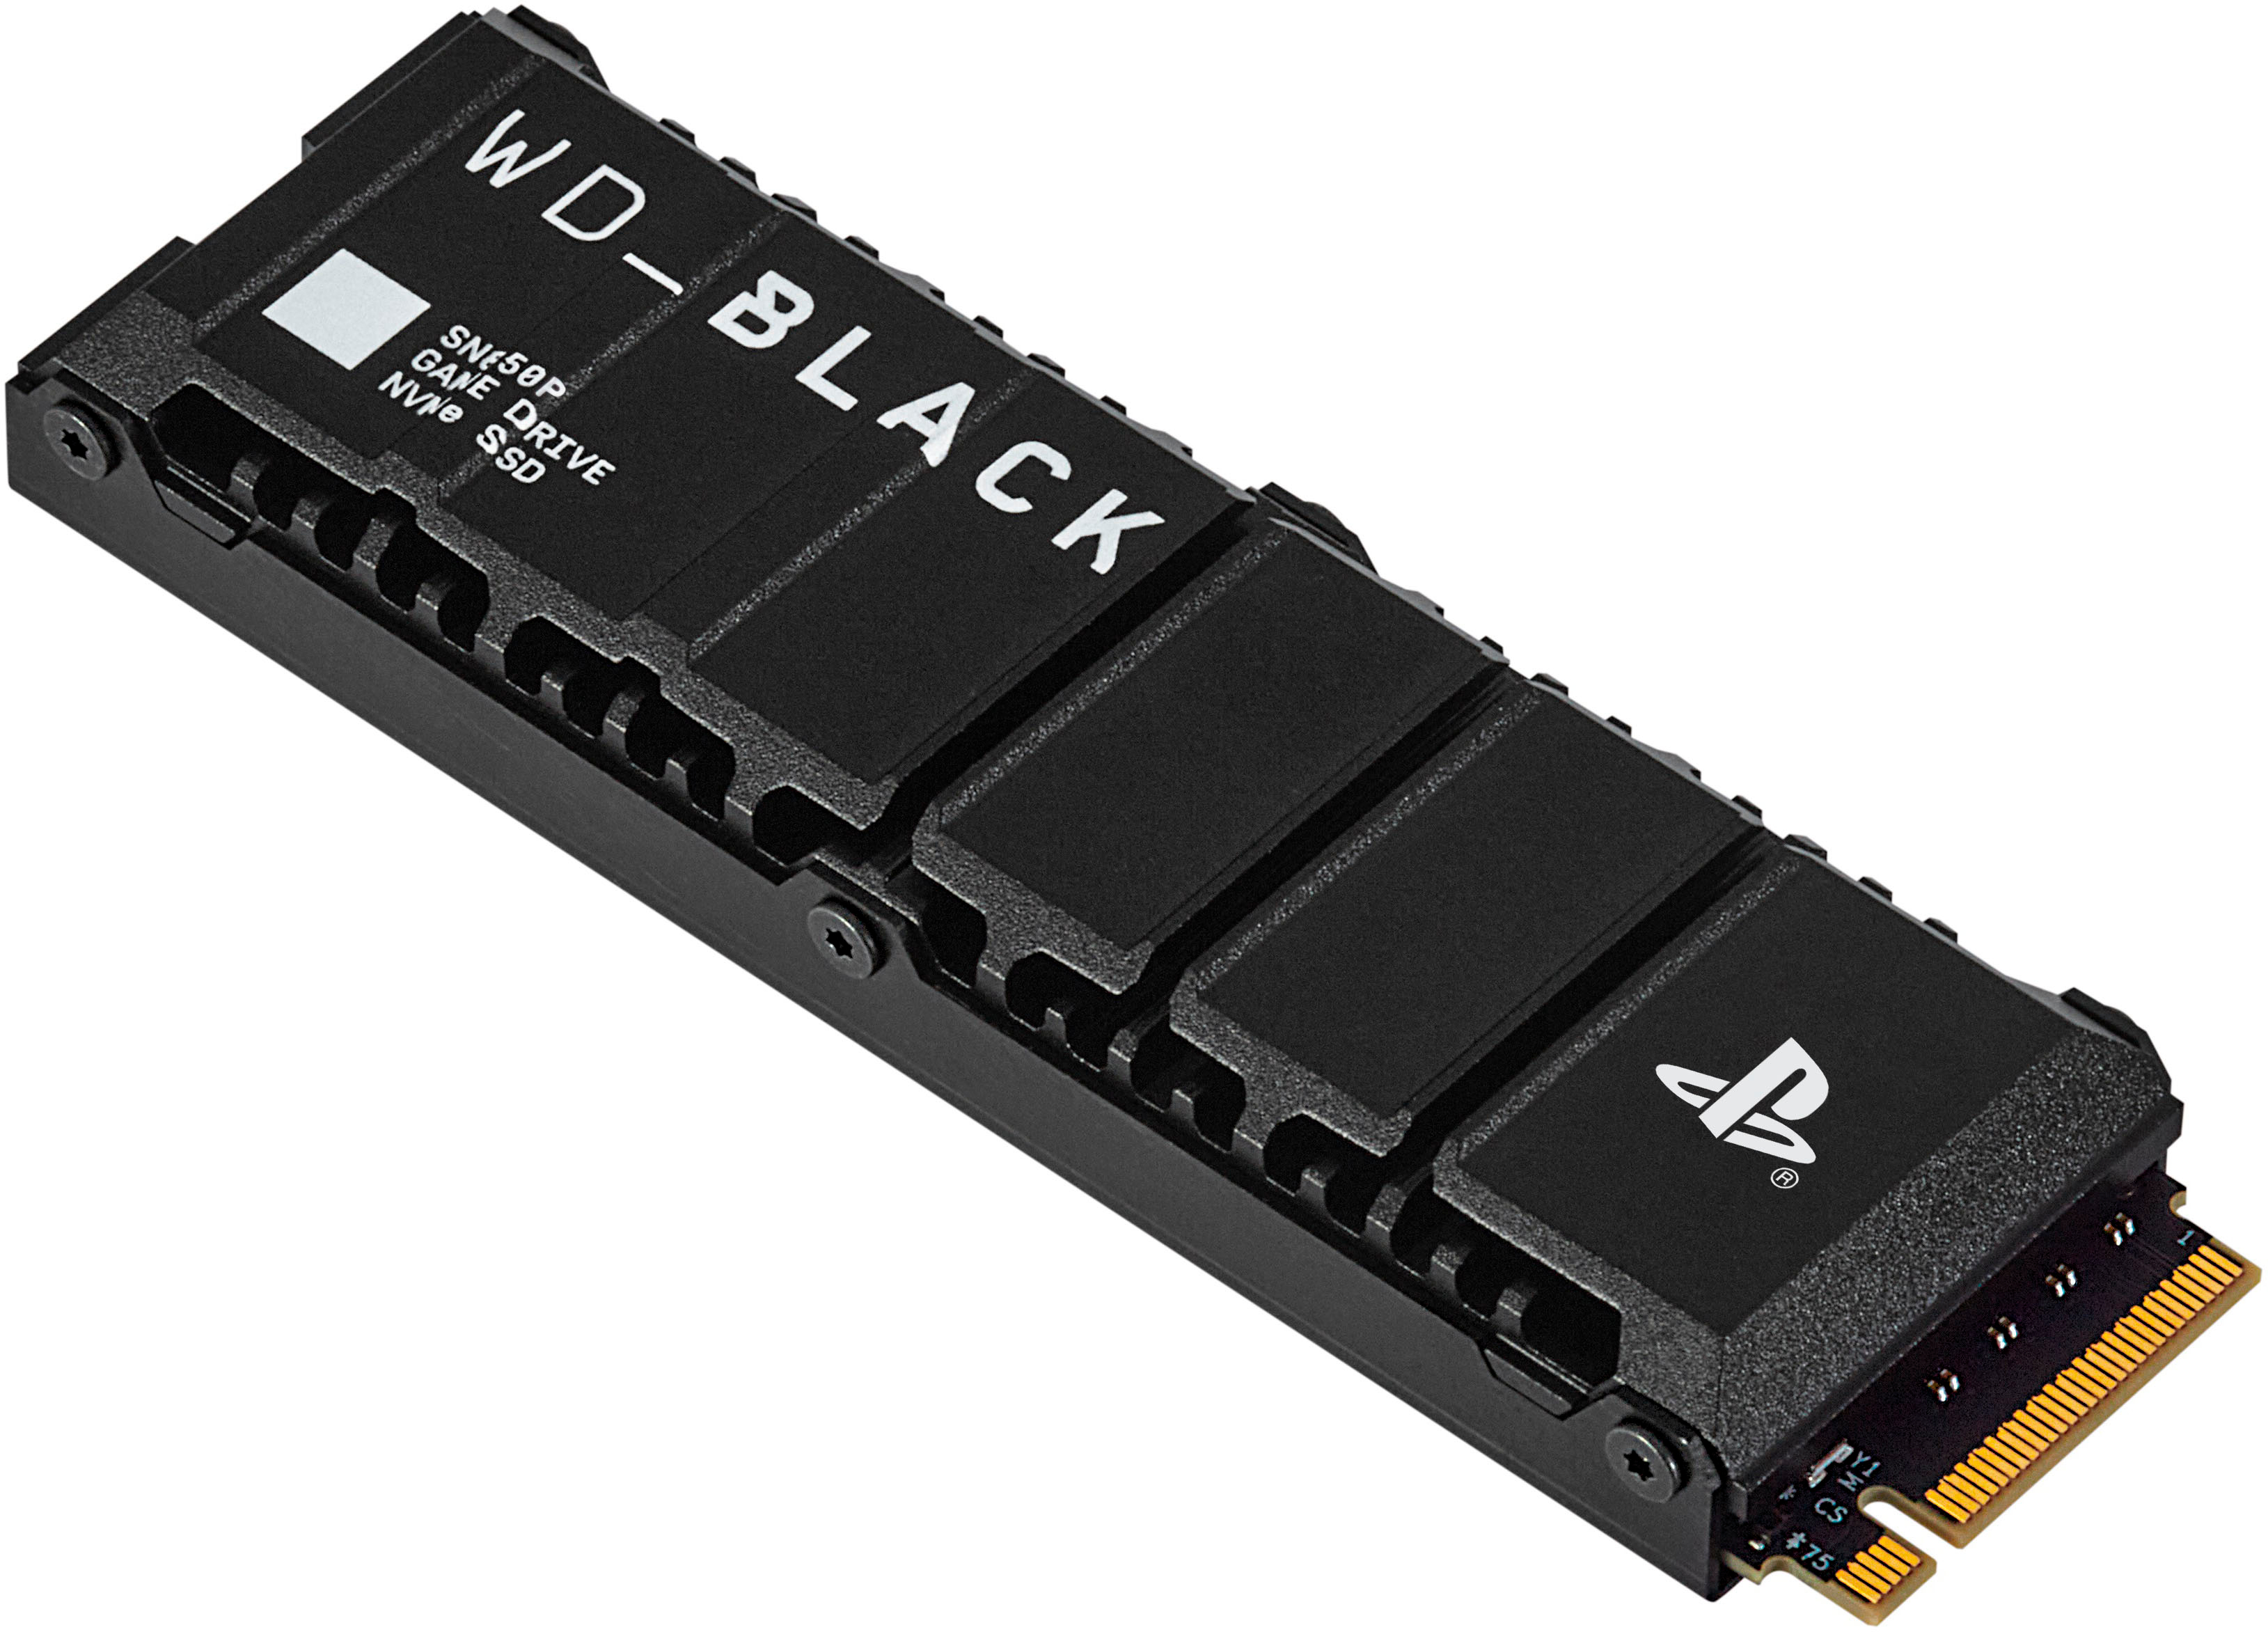 Western Digital Offers First Official PlayStation-Licensed SSD for